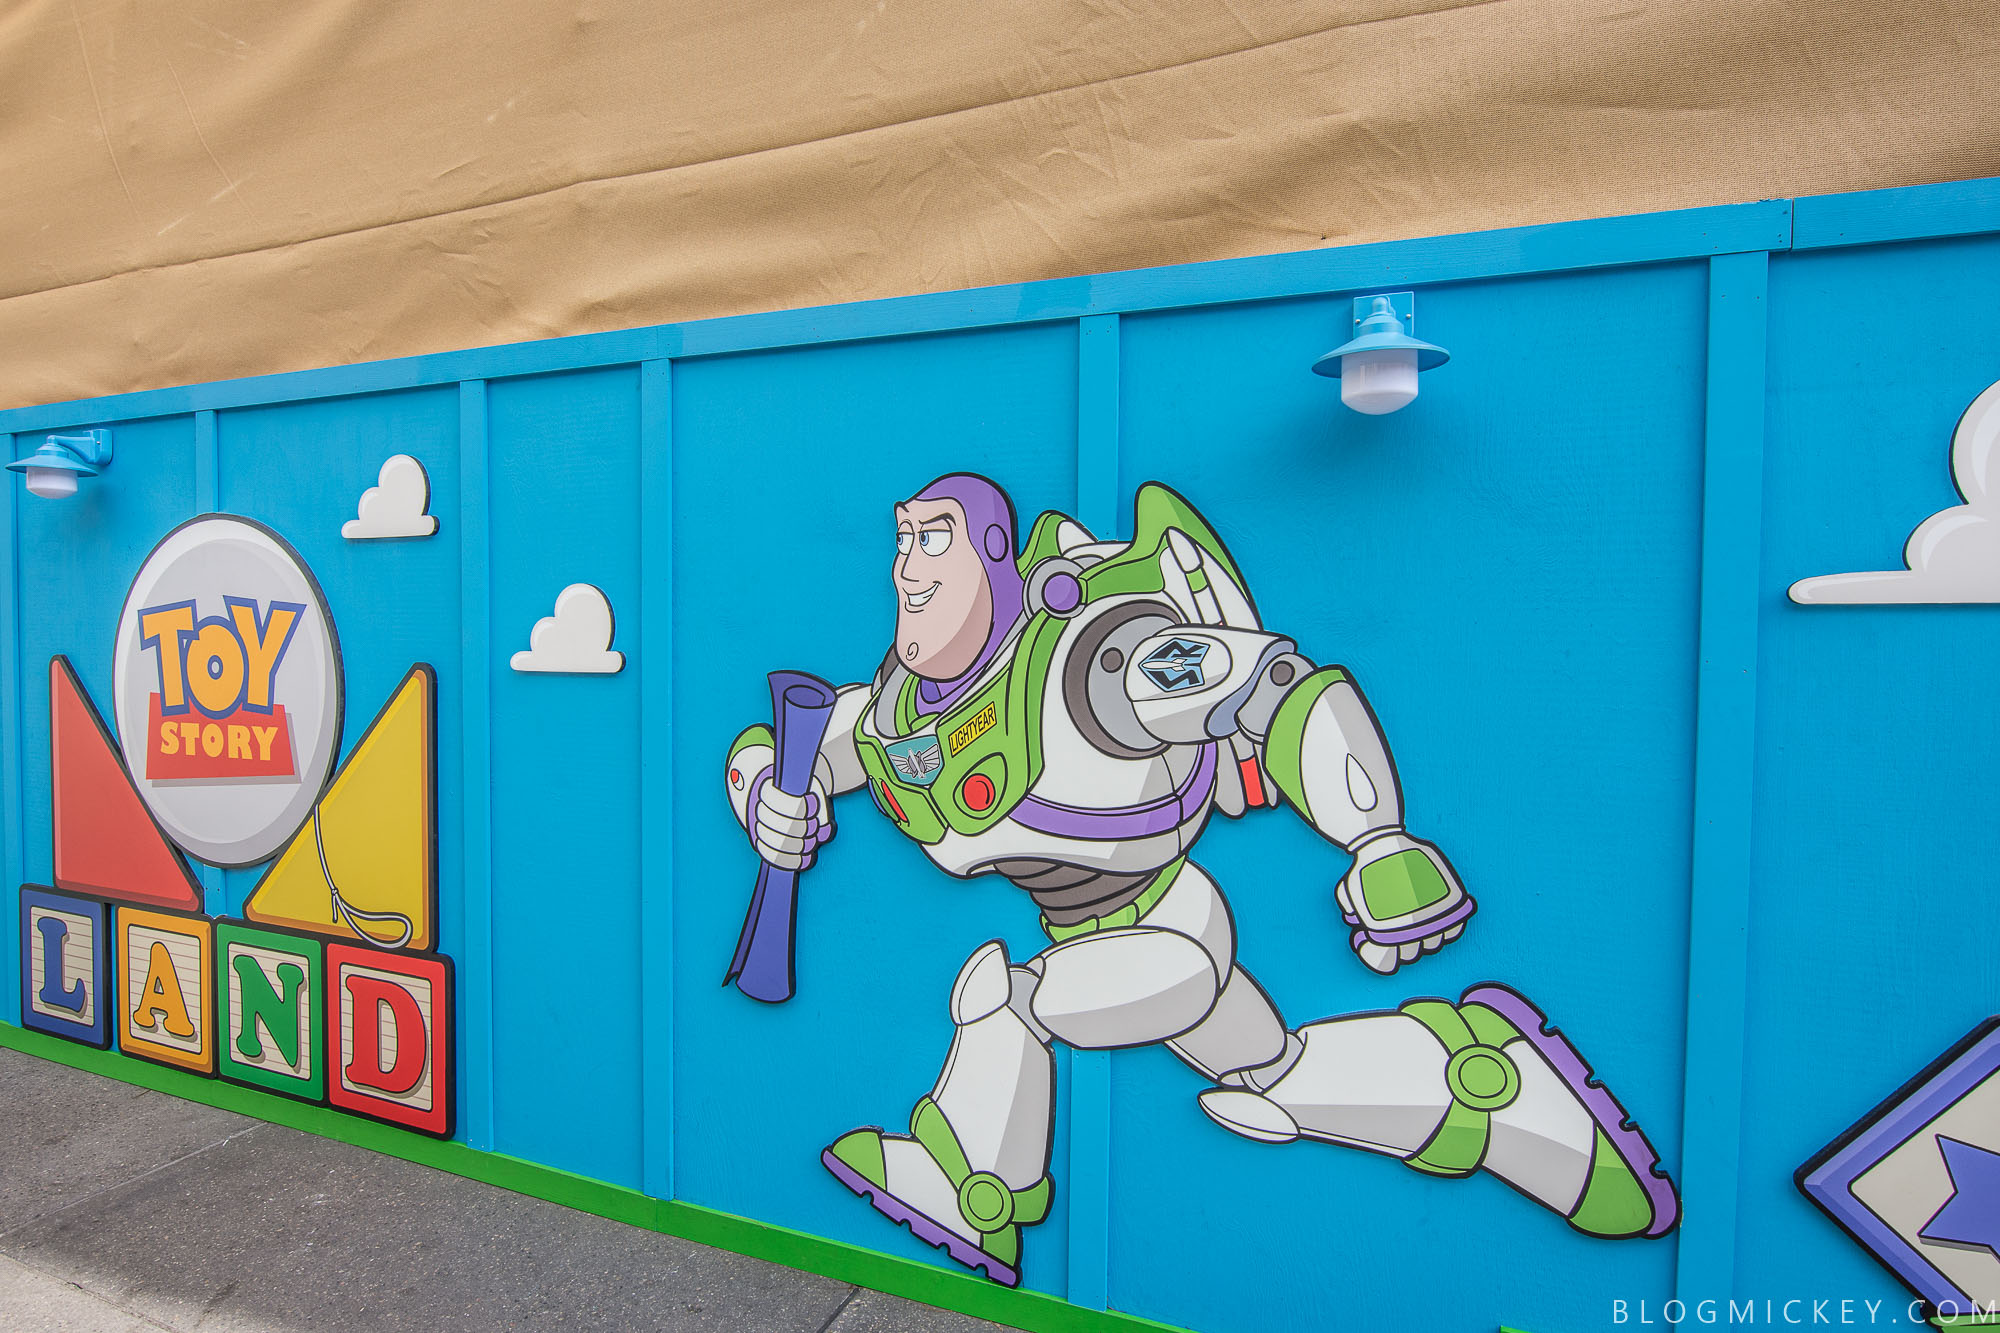 PHOTOS: Toy Story Land Logo and Characters Appear on Construction Walls ...